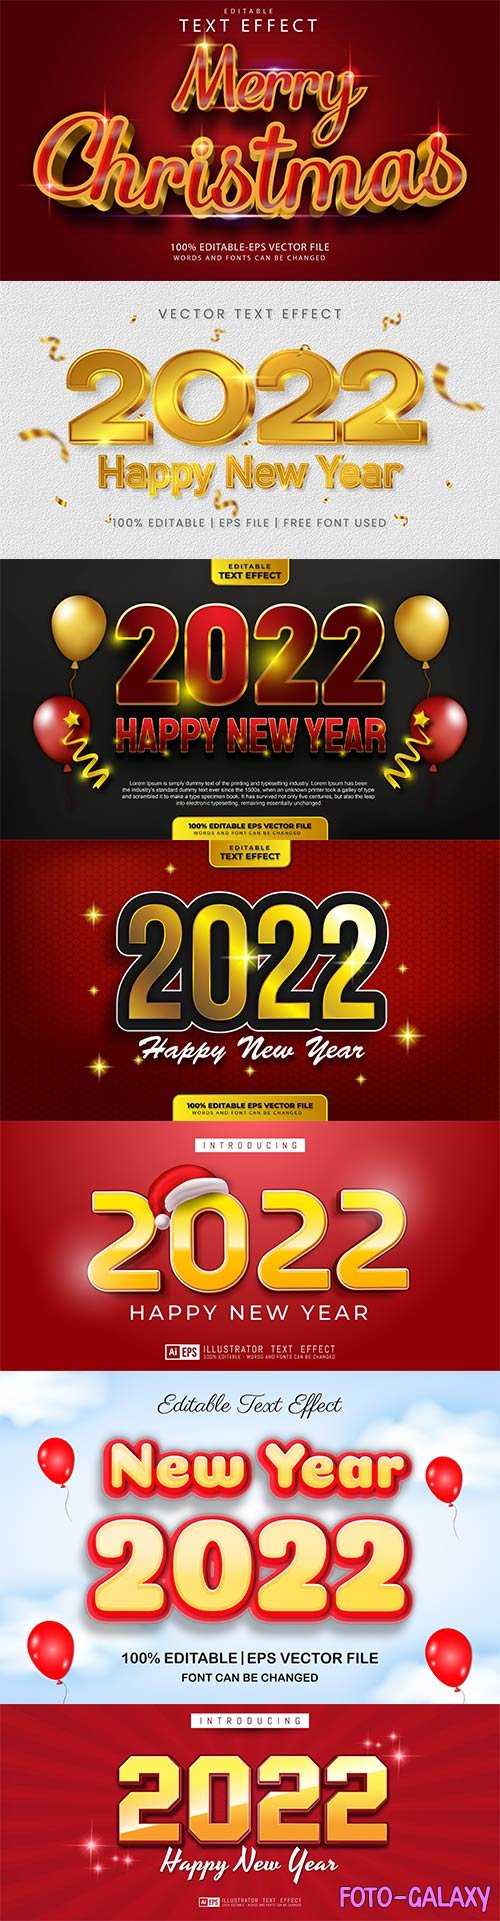 Merry christmas and happy new year 2022 editable vector text effects vol 10